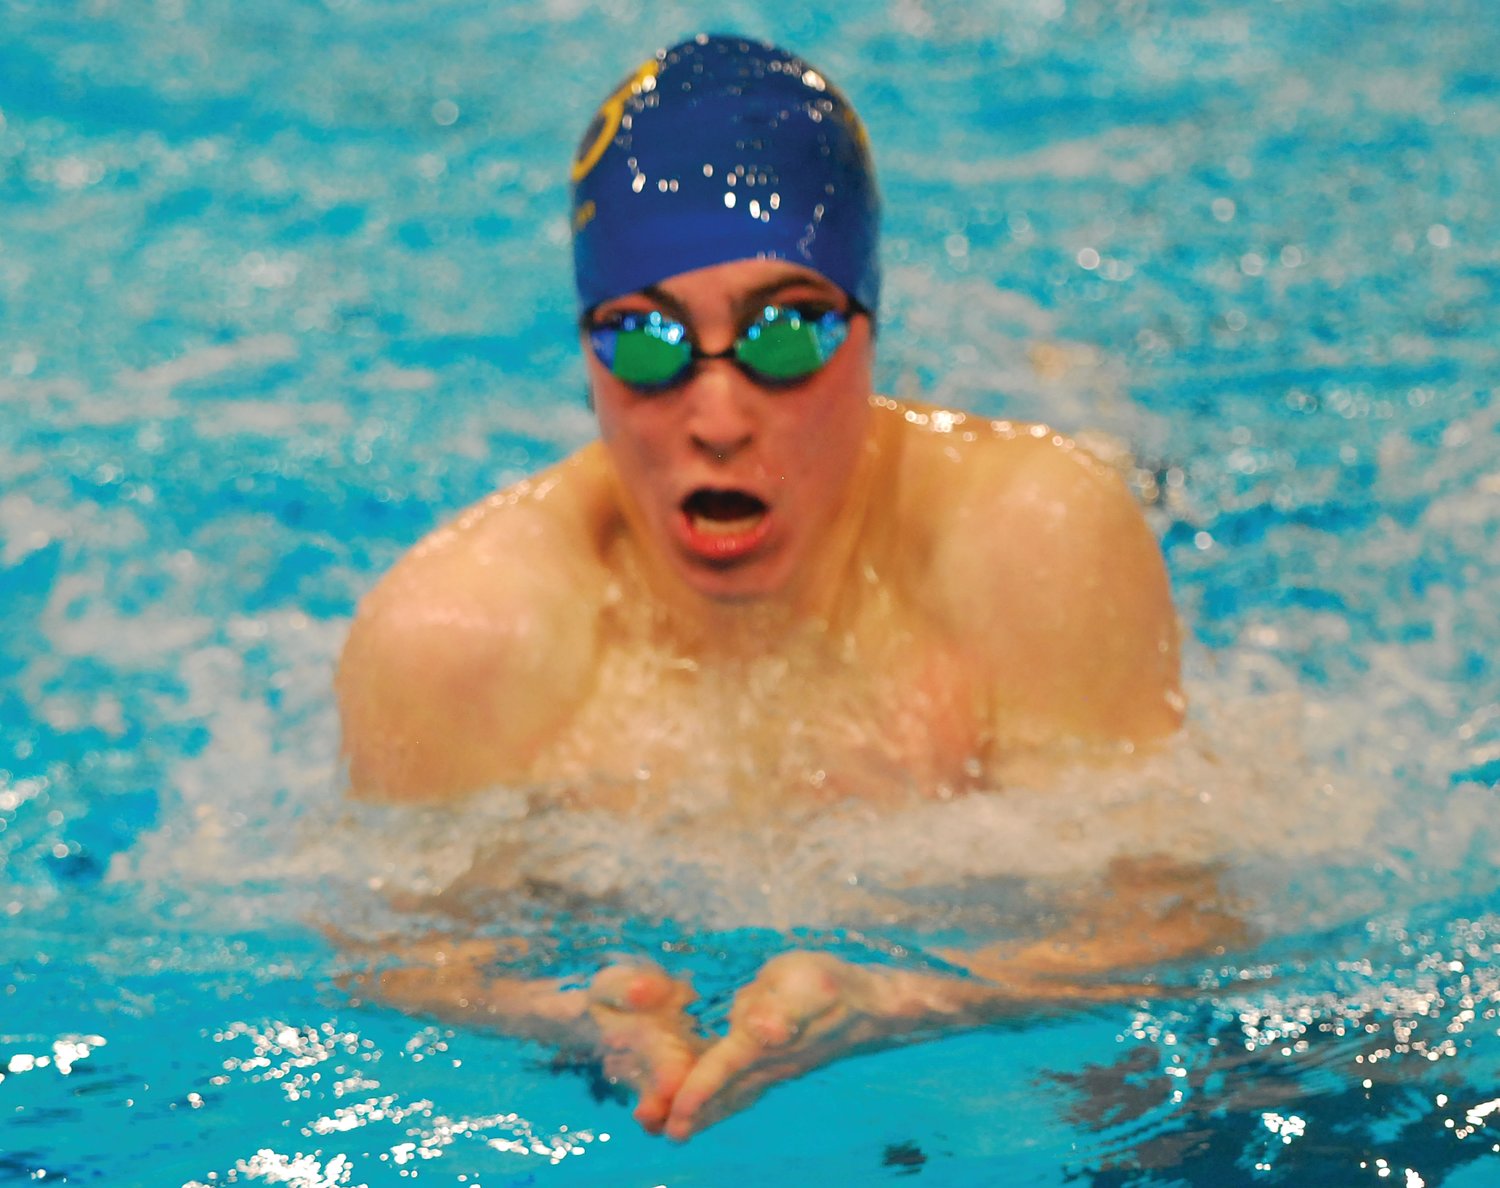 Crawfordsville's Marshall Horton swam to wins in the 100 freestyle and 100 breaststroke.